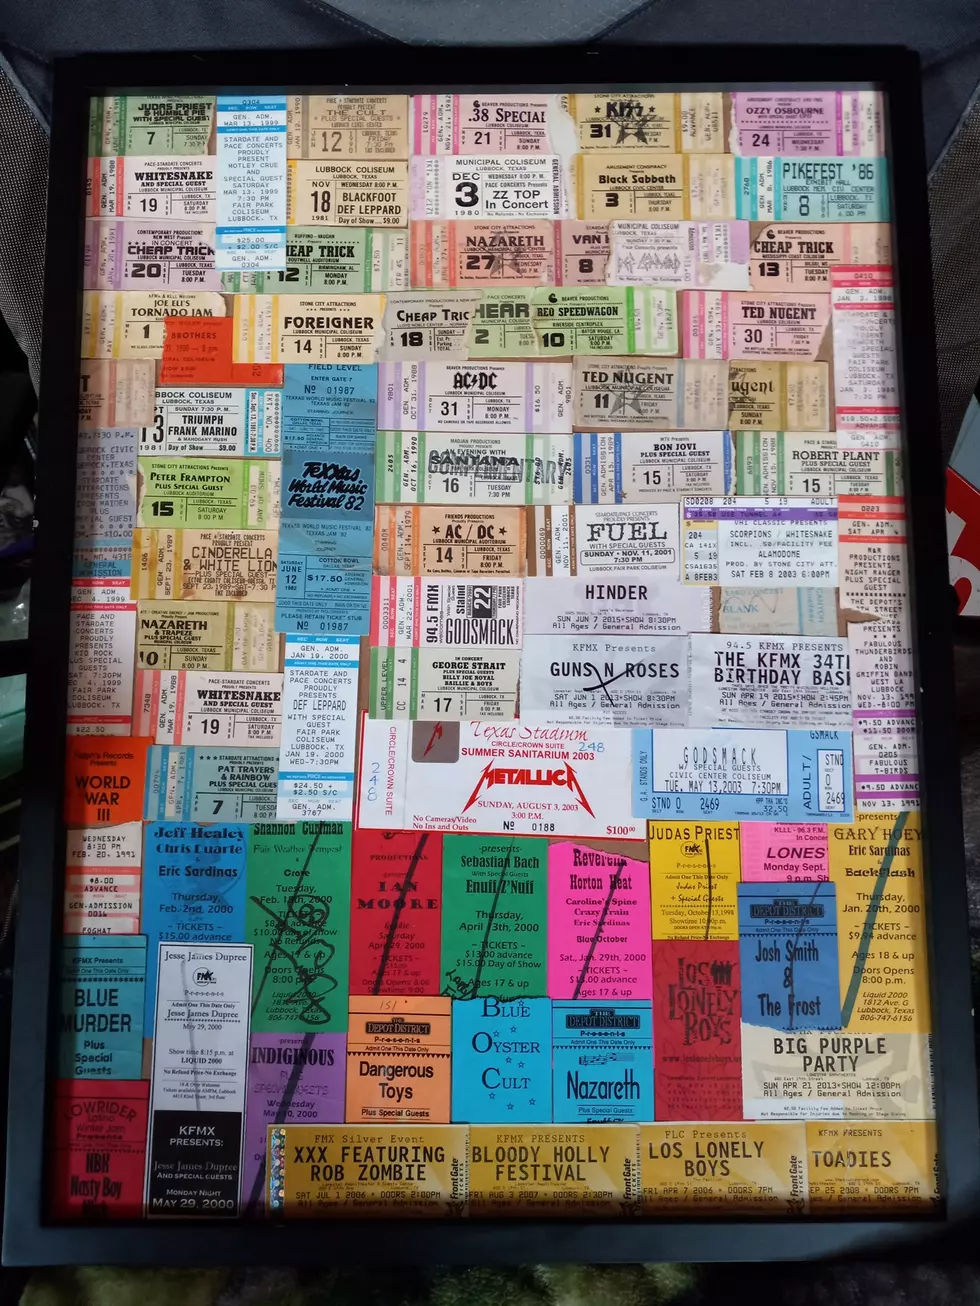 You Cannot Beat This Collection of Lubbock Concert Tickets